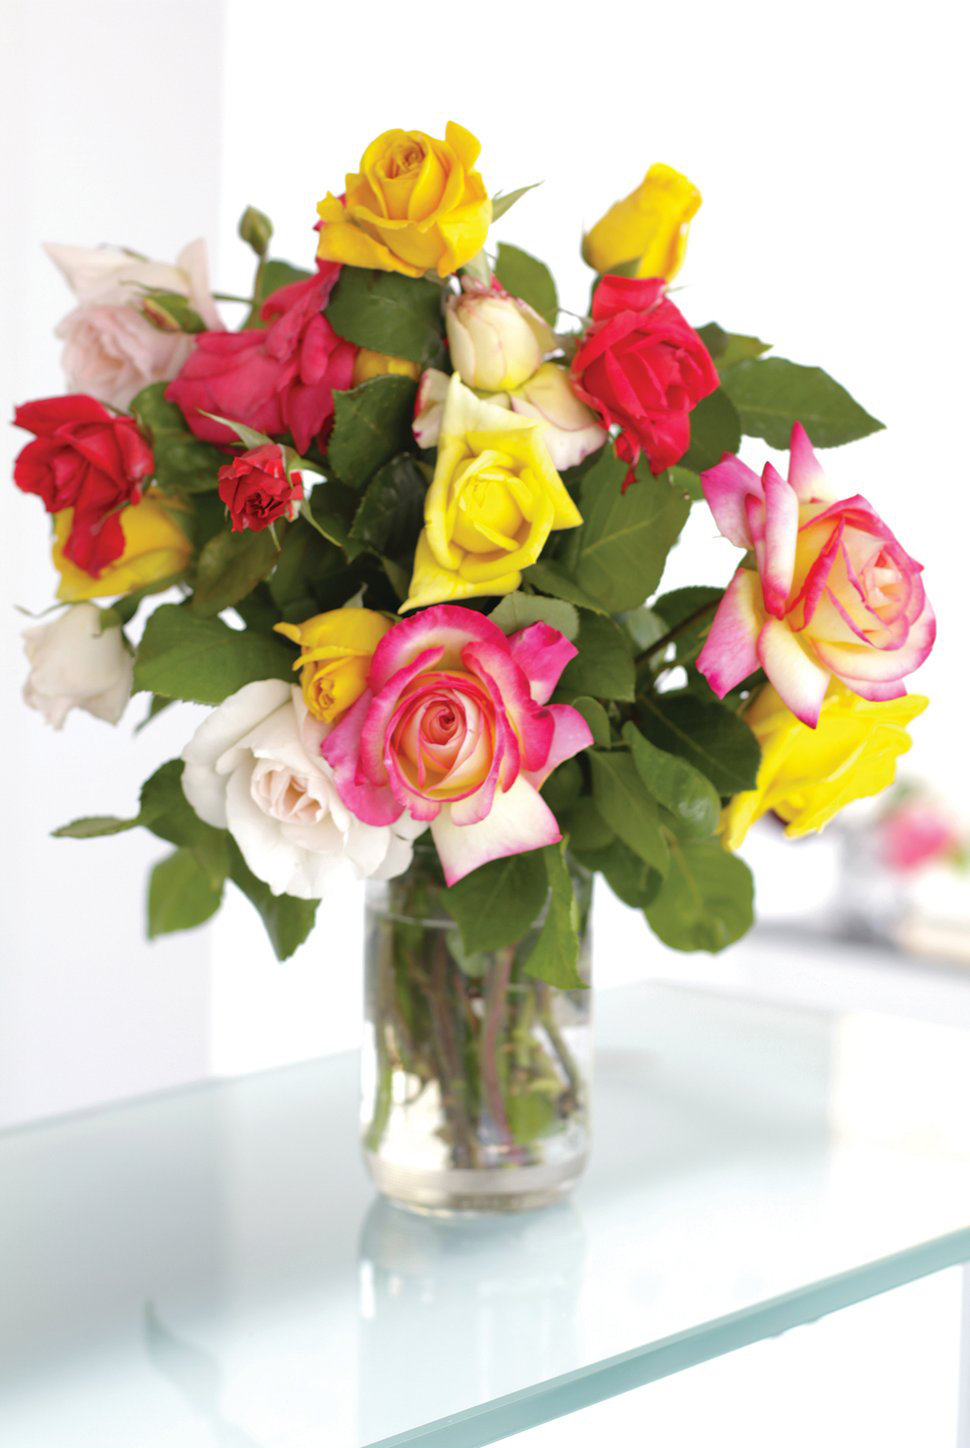 Flowers are traditionally given for Valentine’s Day, Mother’s Day, anniversaries and other special events.